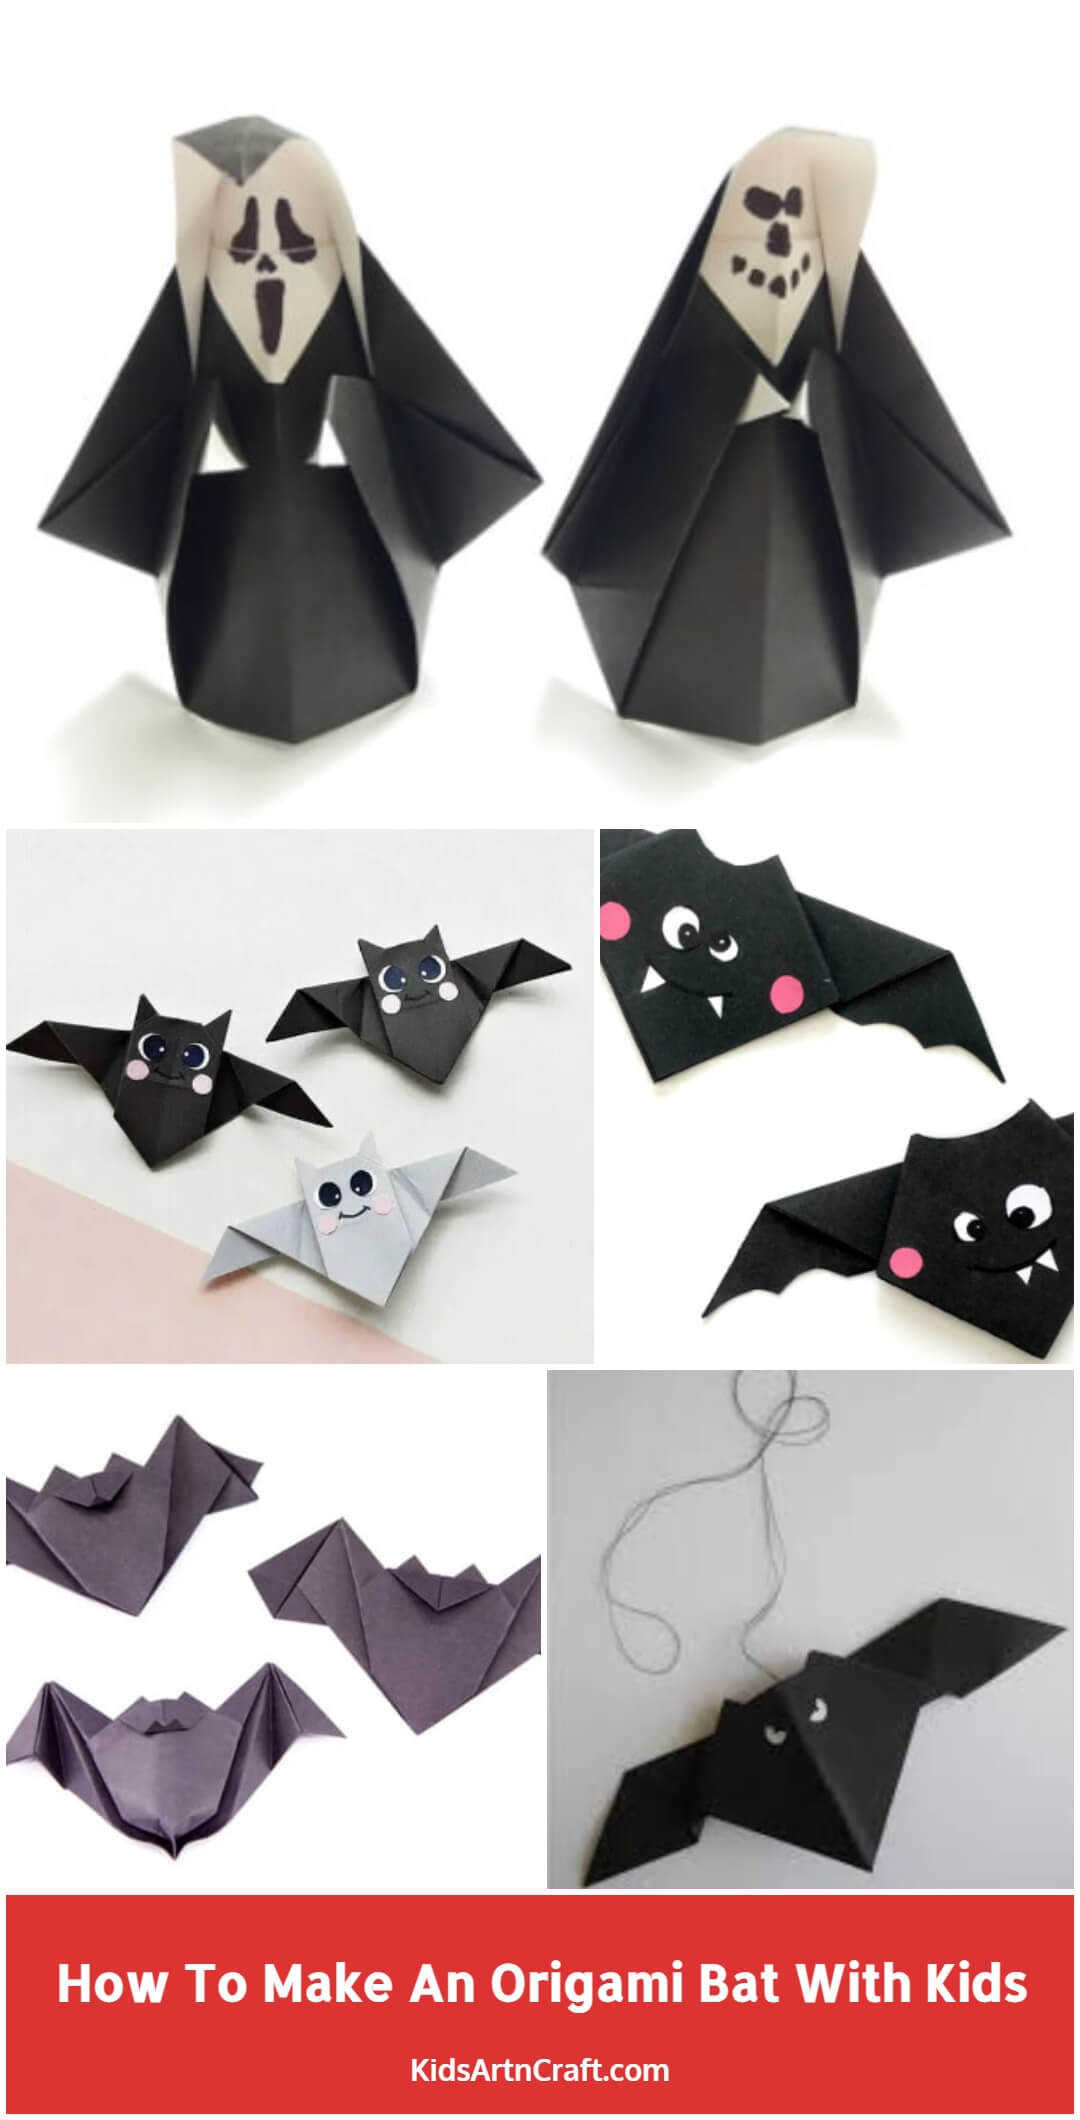 How To Make An Origami Bat With Kids